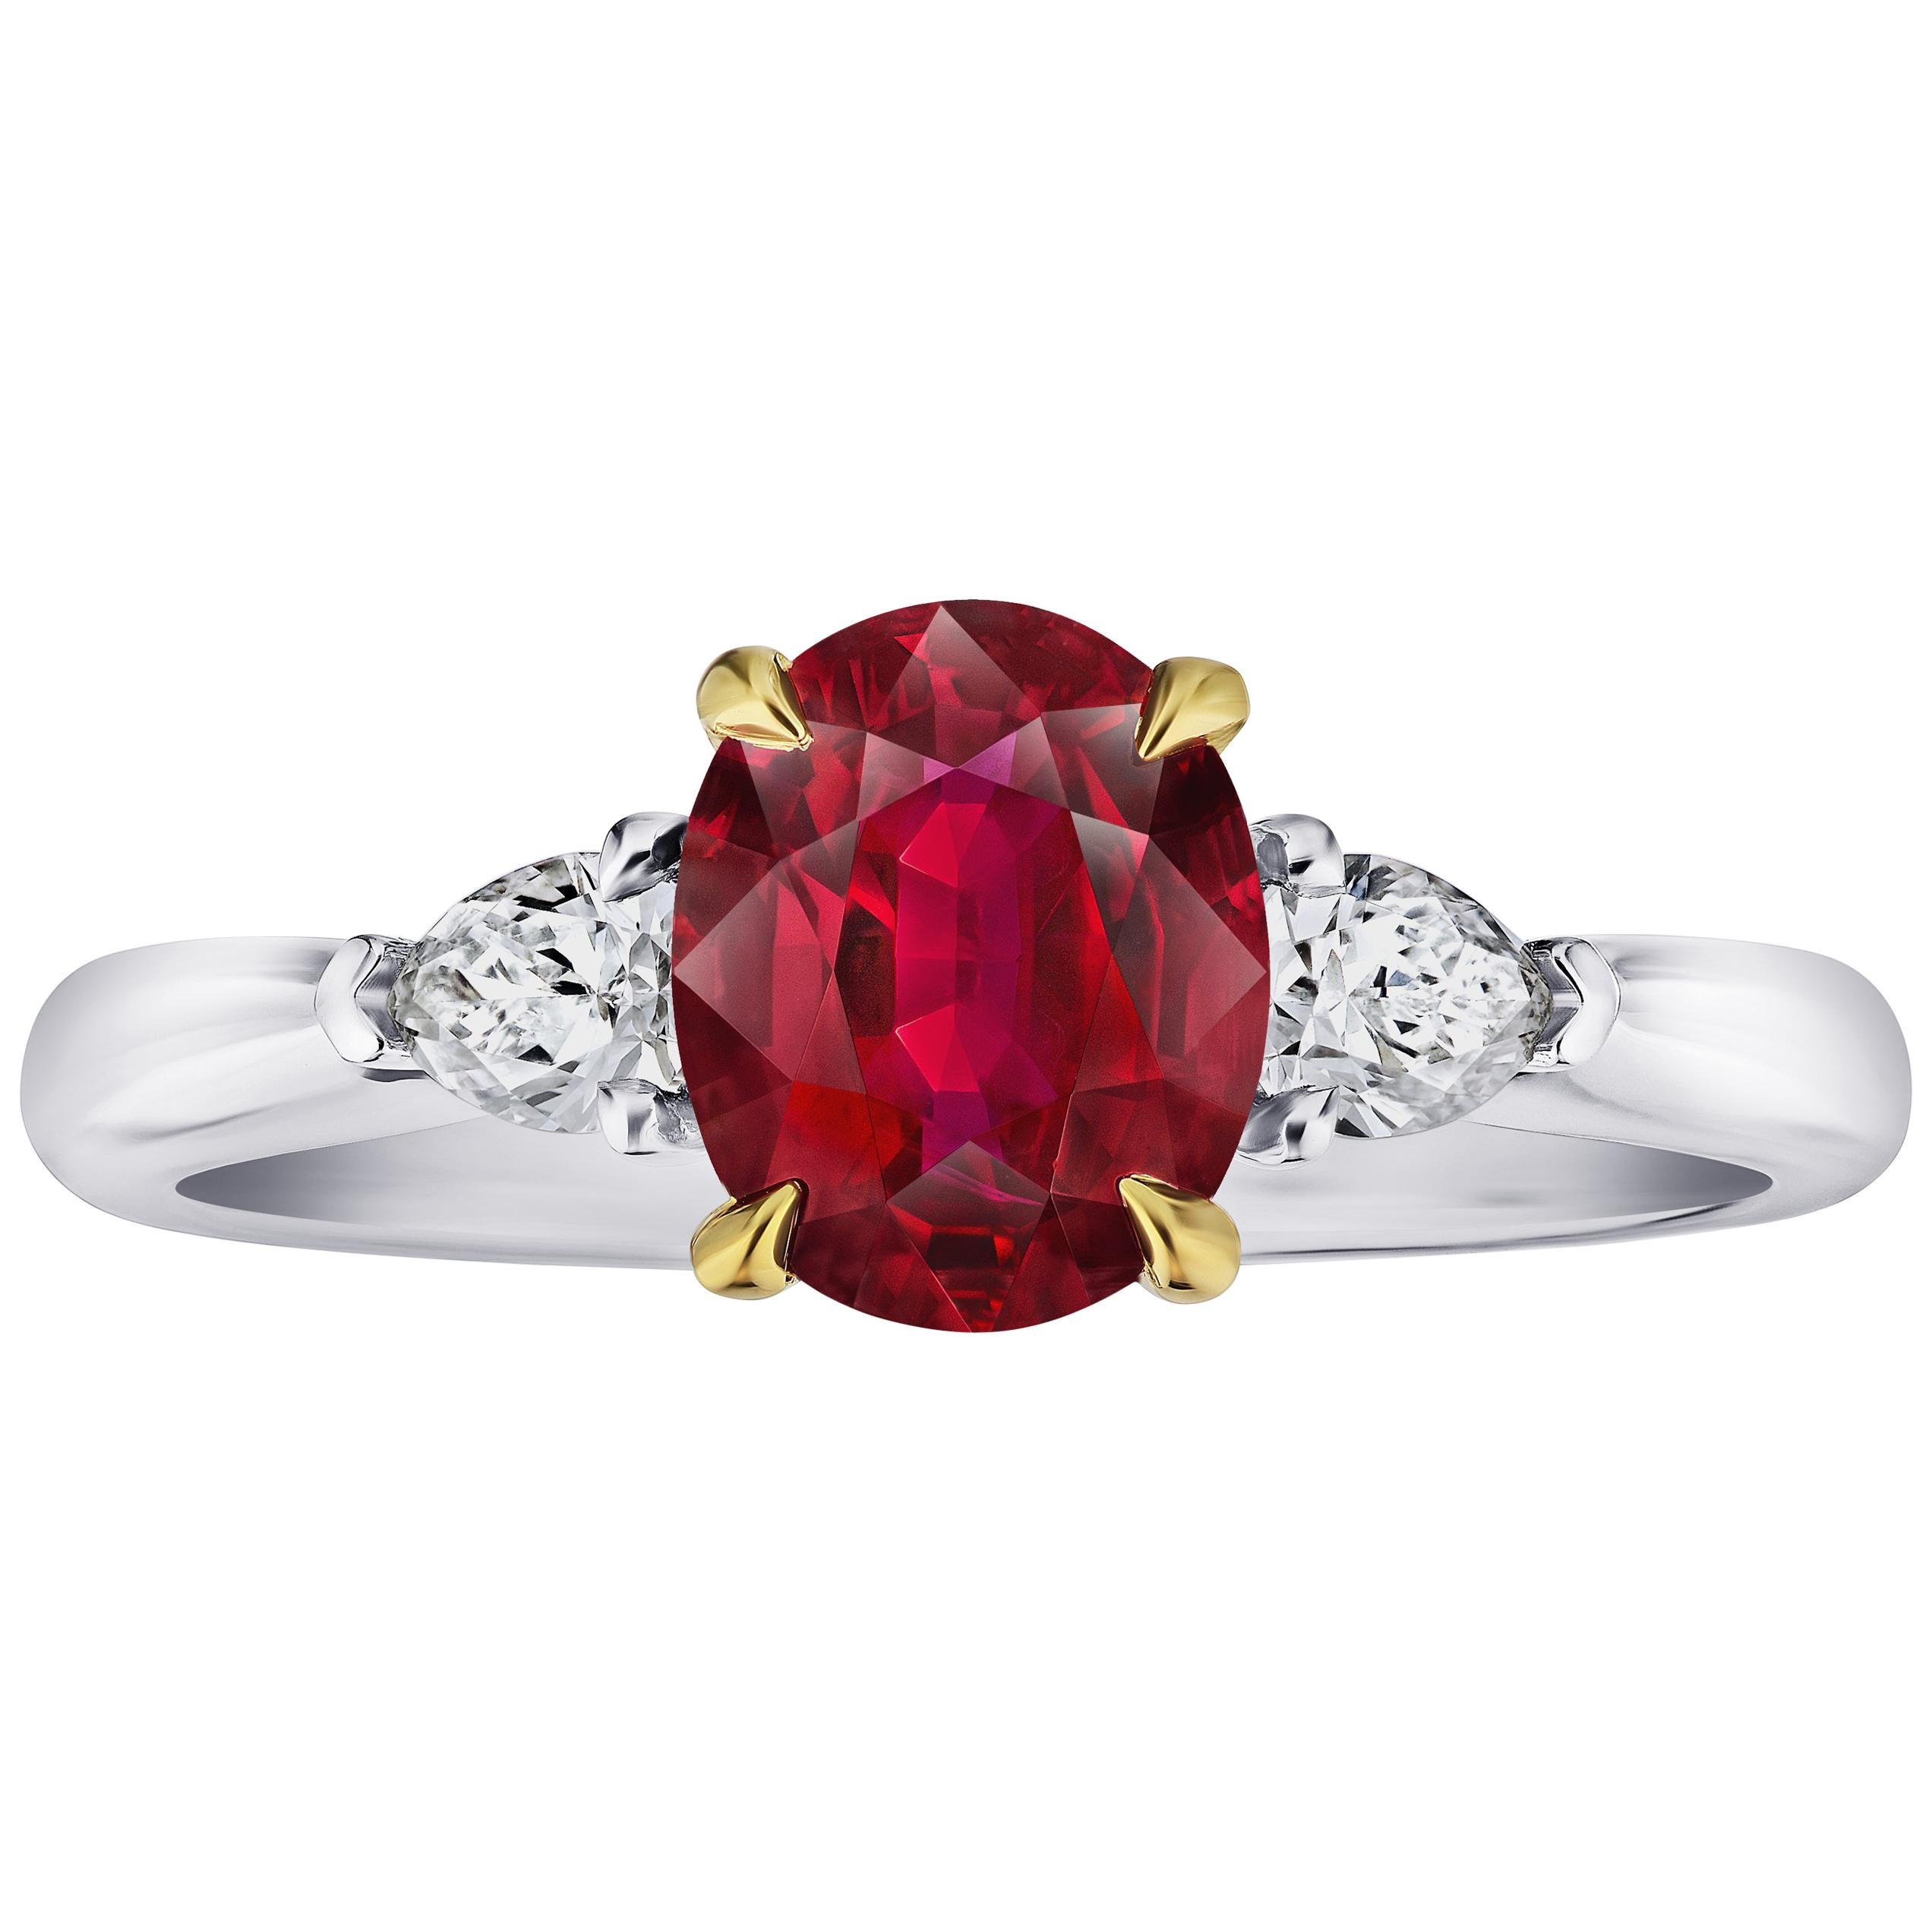 1.72 Carat Oval Red Ruby and Diamond Ring